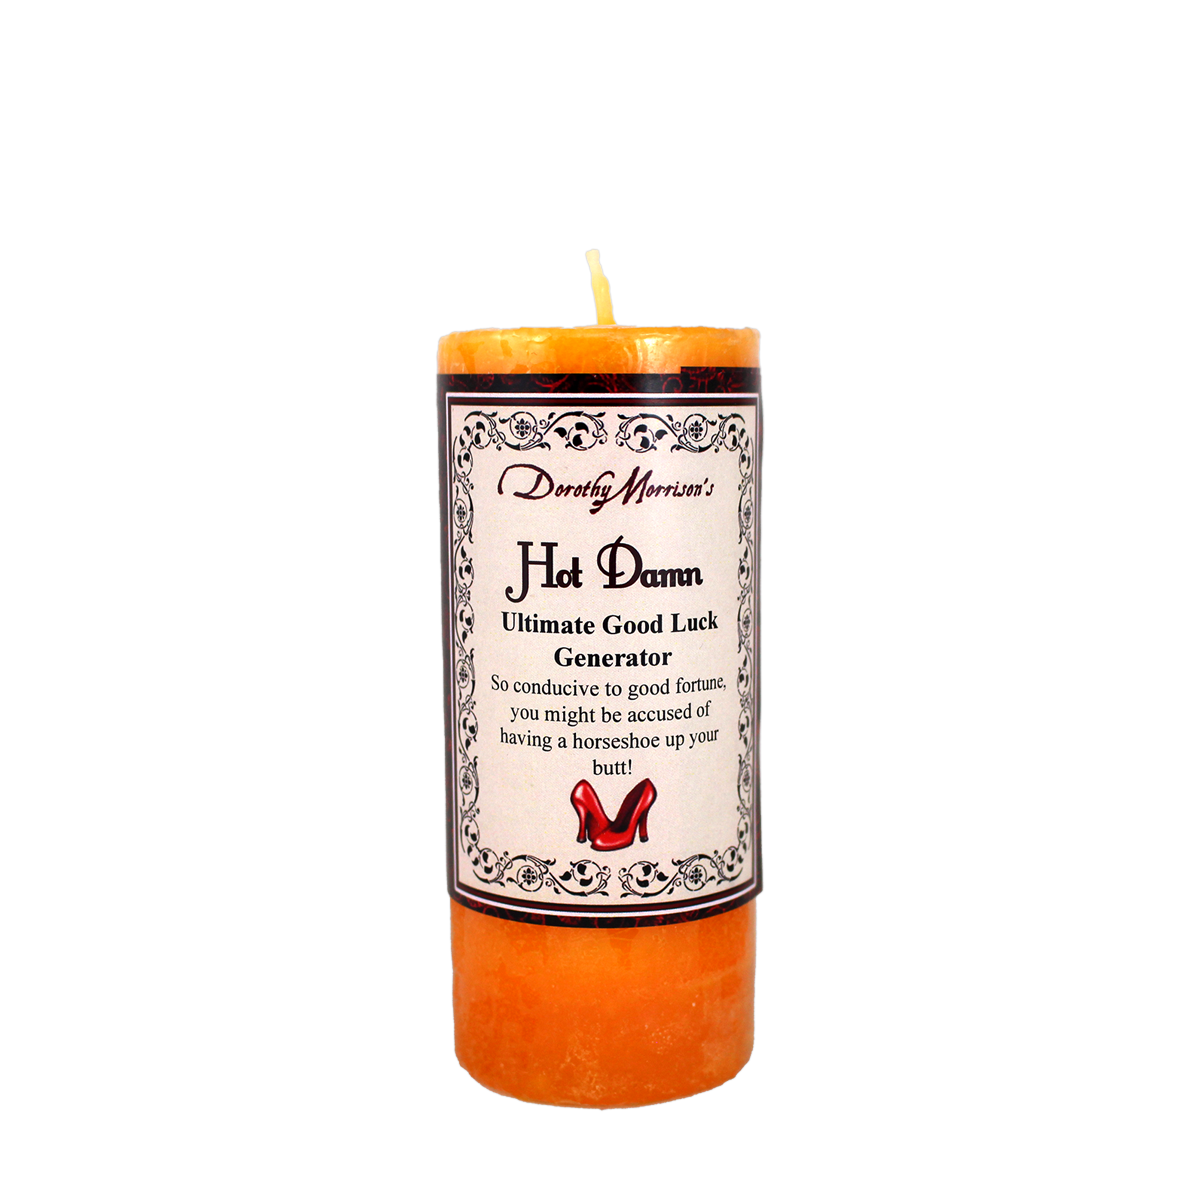 Dorothy Morrison's Hot Damn limited edition candle - Ultimate Good Luck Generator